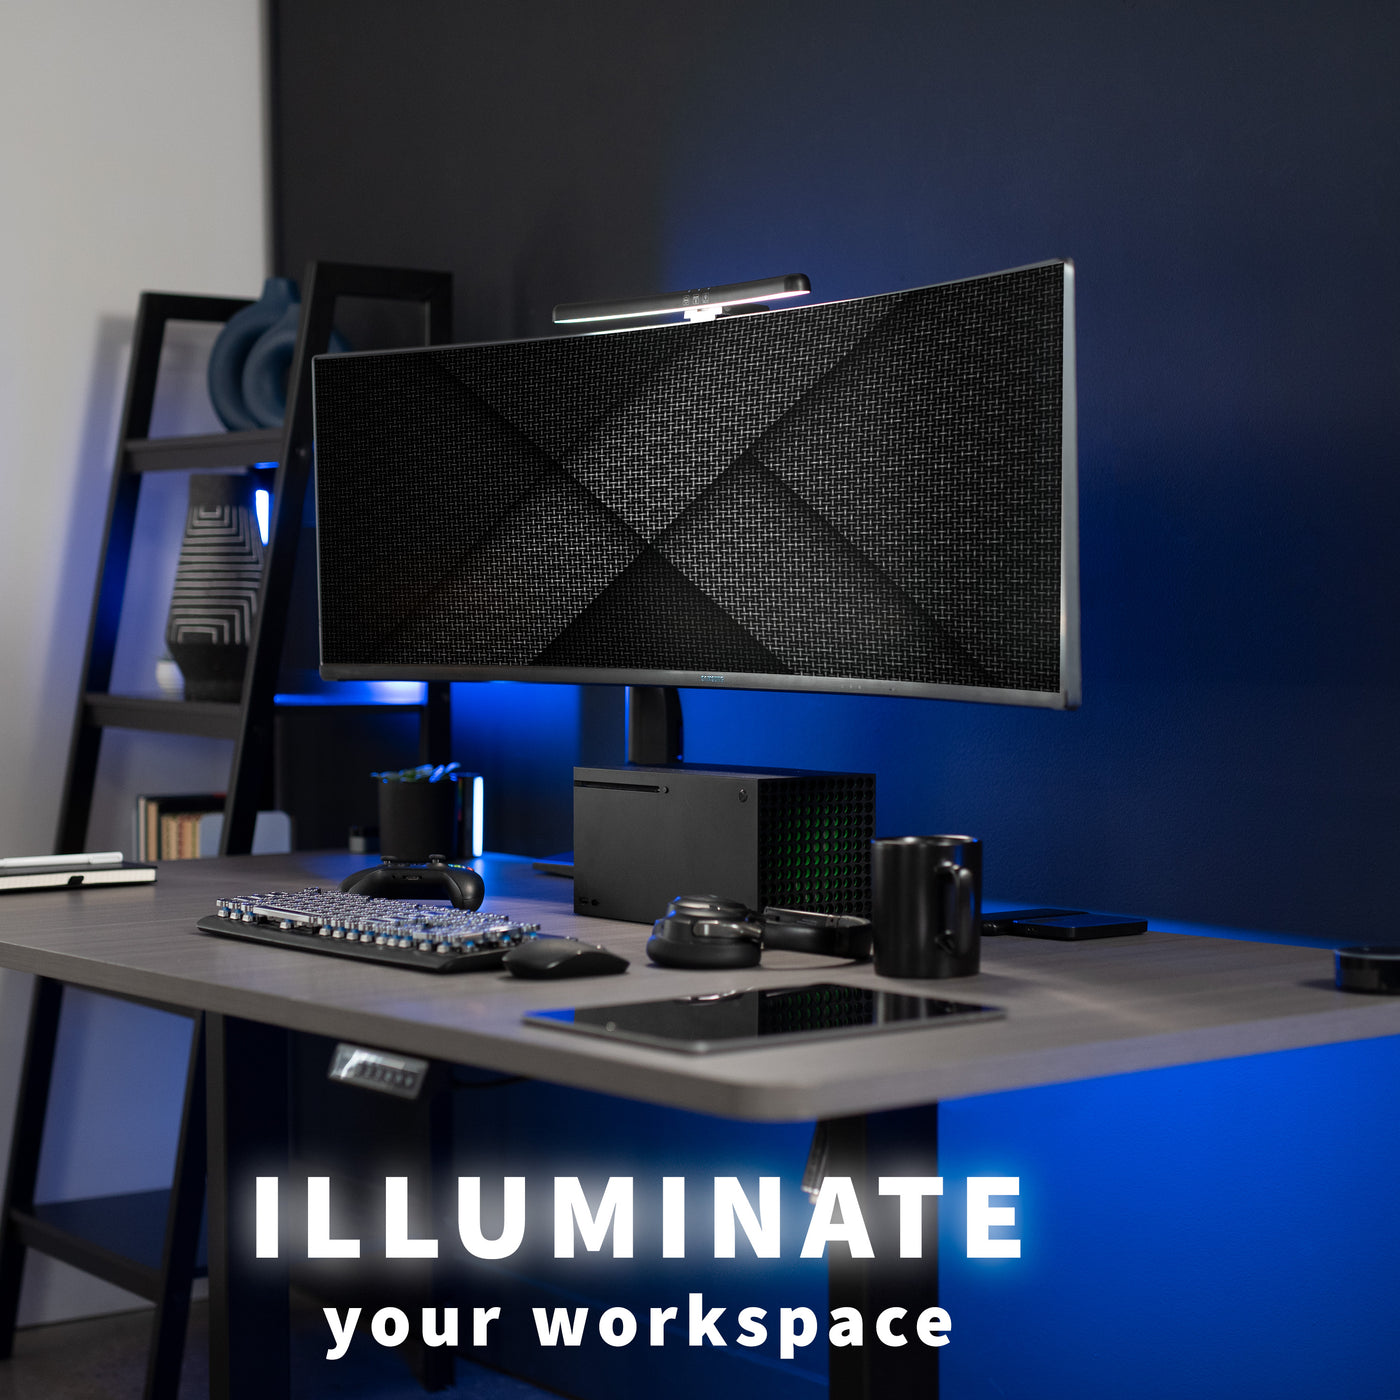 LED light bar for curved monitors powered by USB connection with brightness adjustment and color temperature settings for brighter workstation with no screen glare and increased desk space.